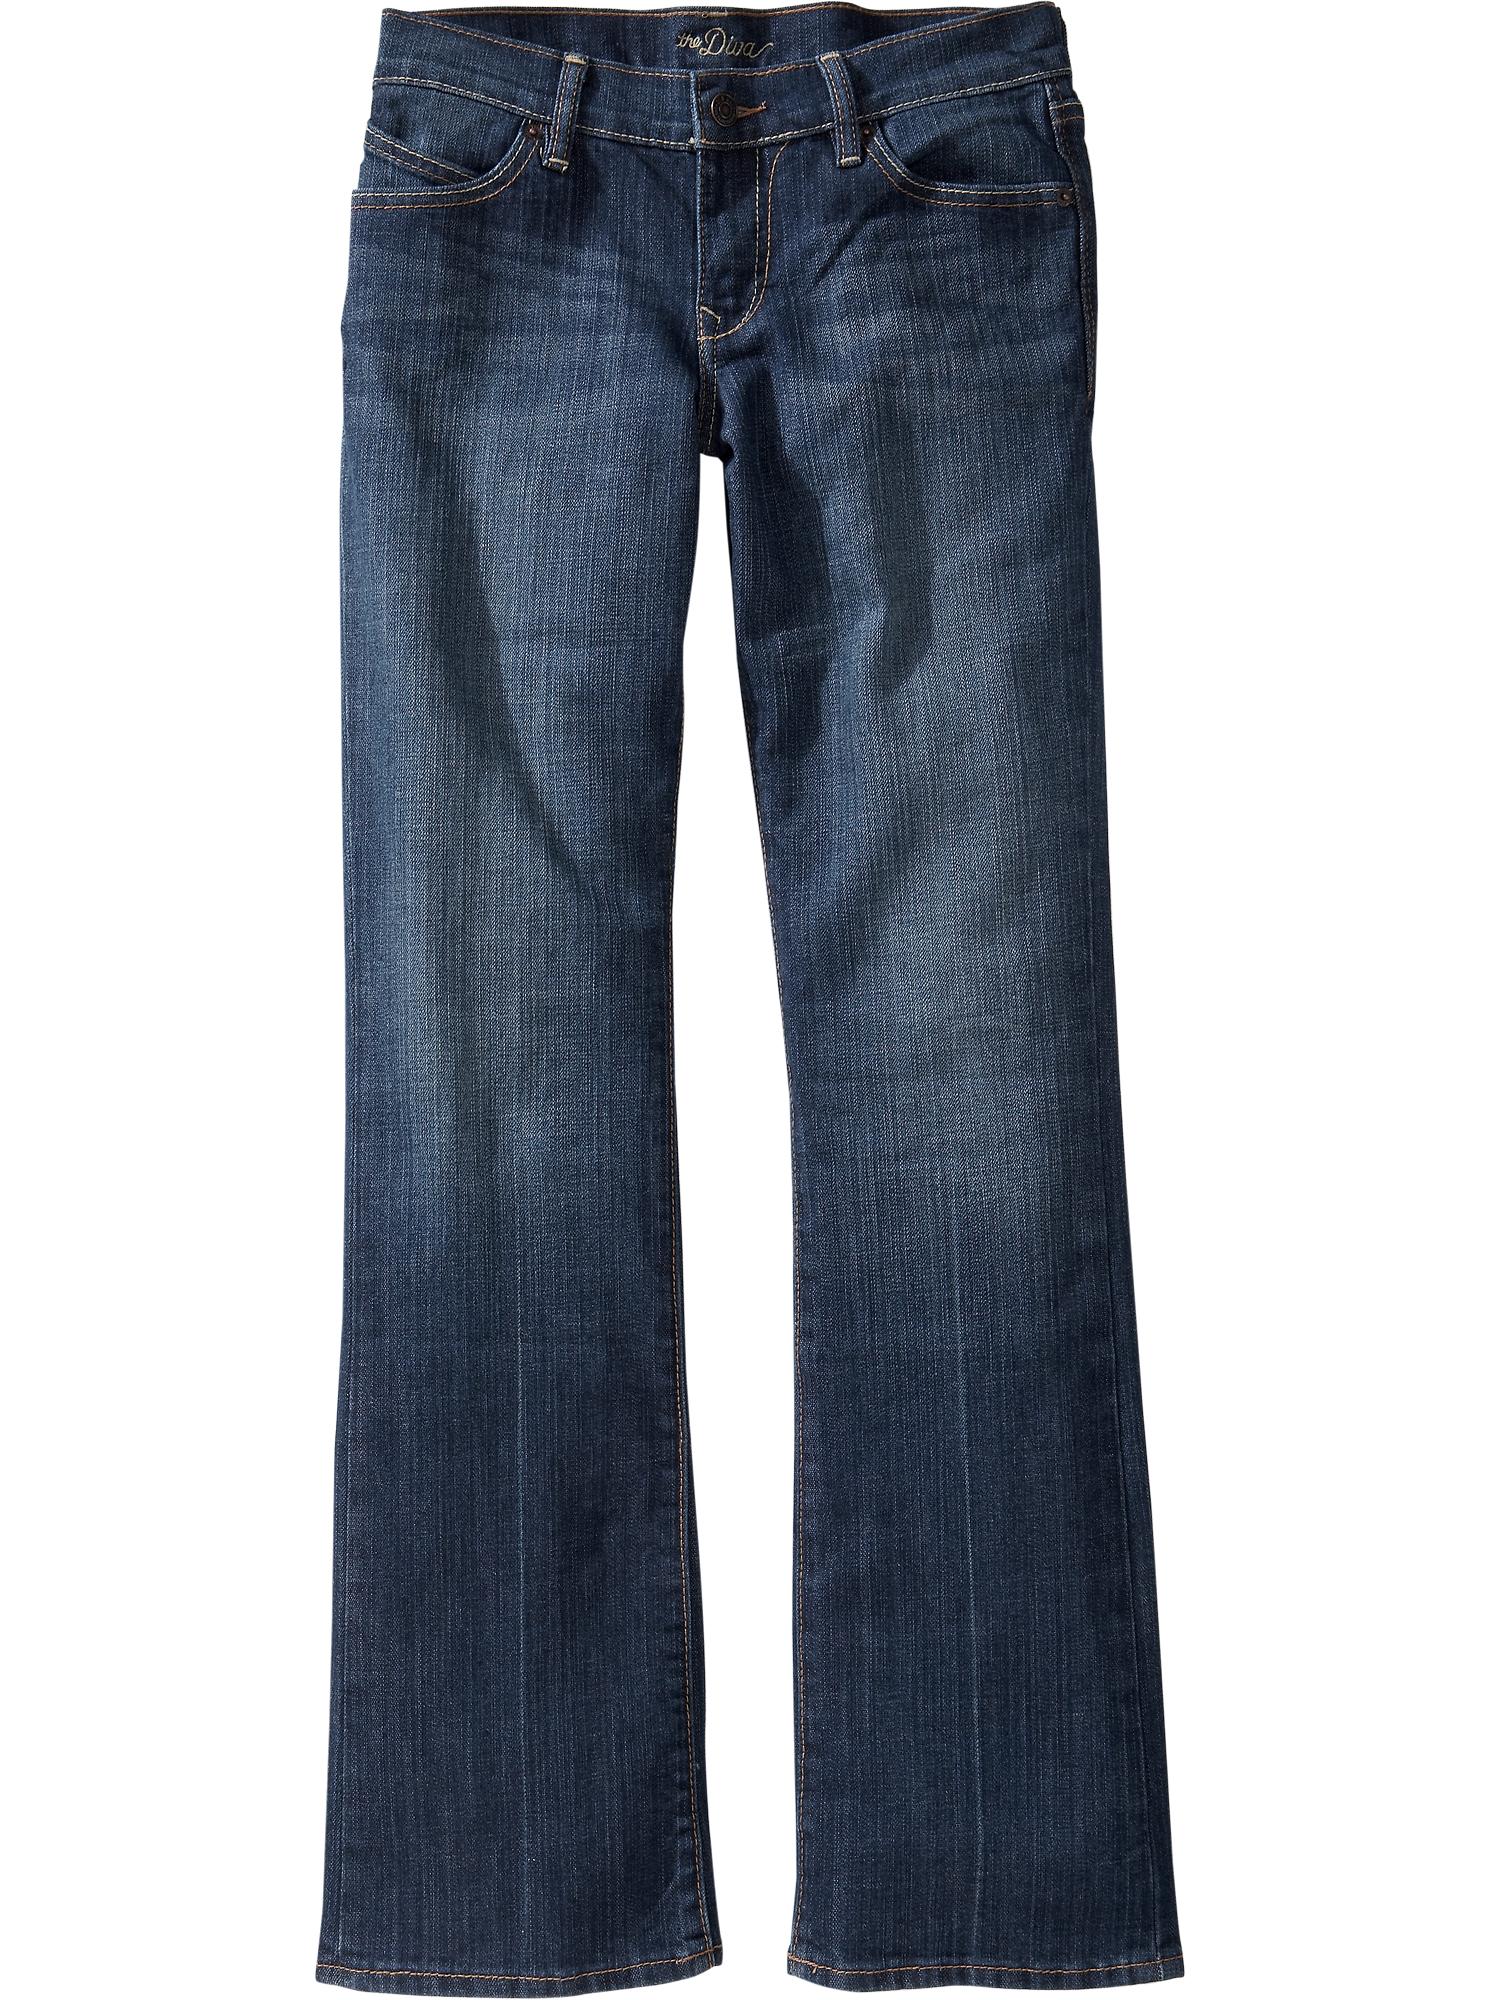 s oliver jeans bootcut